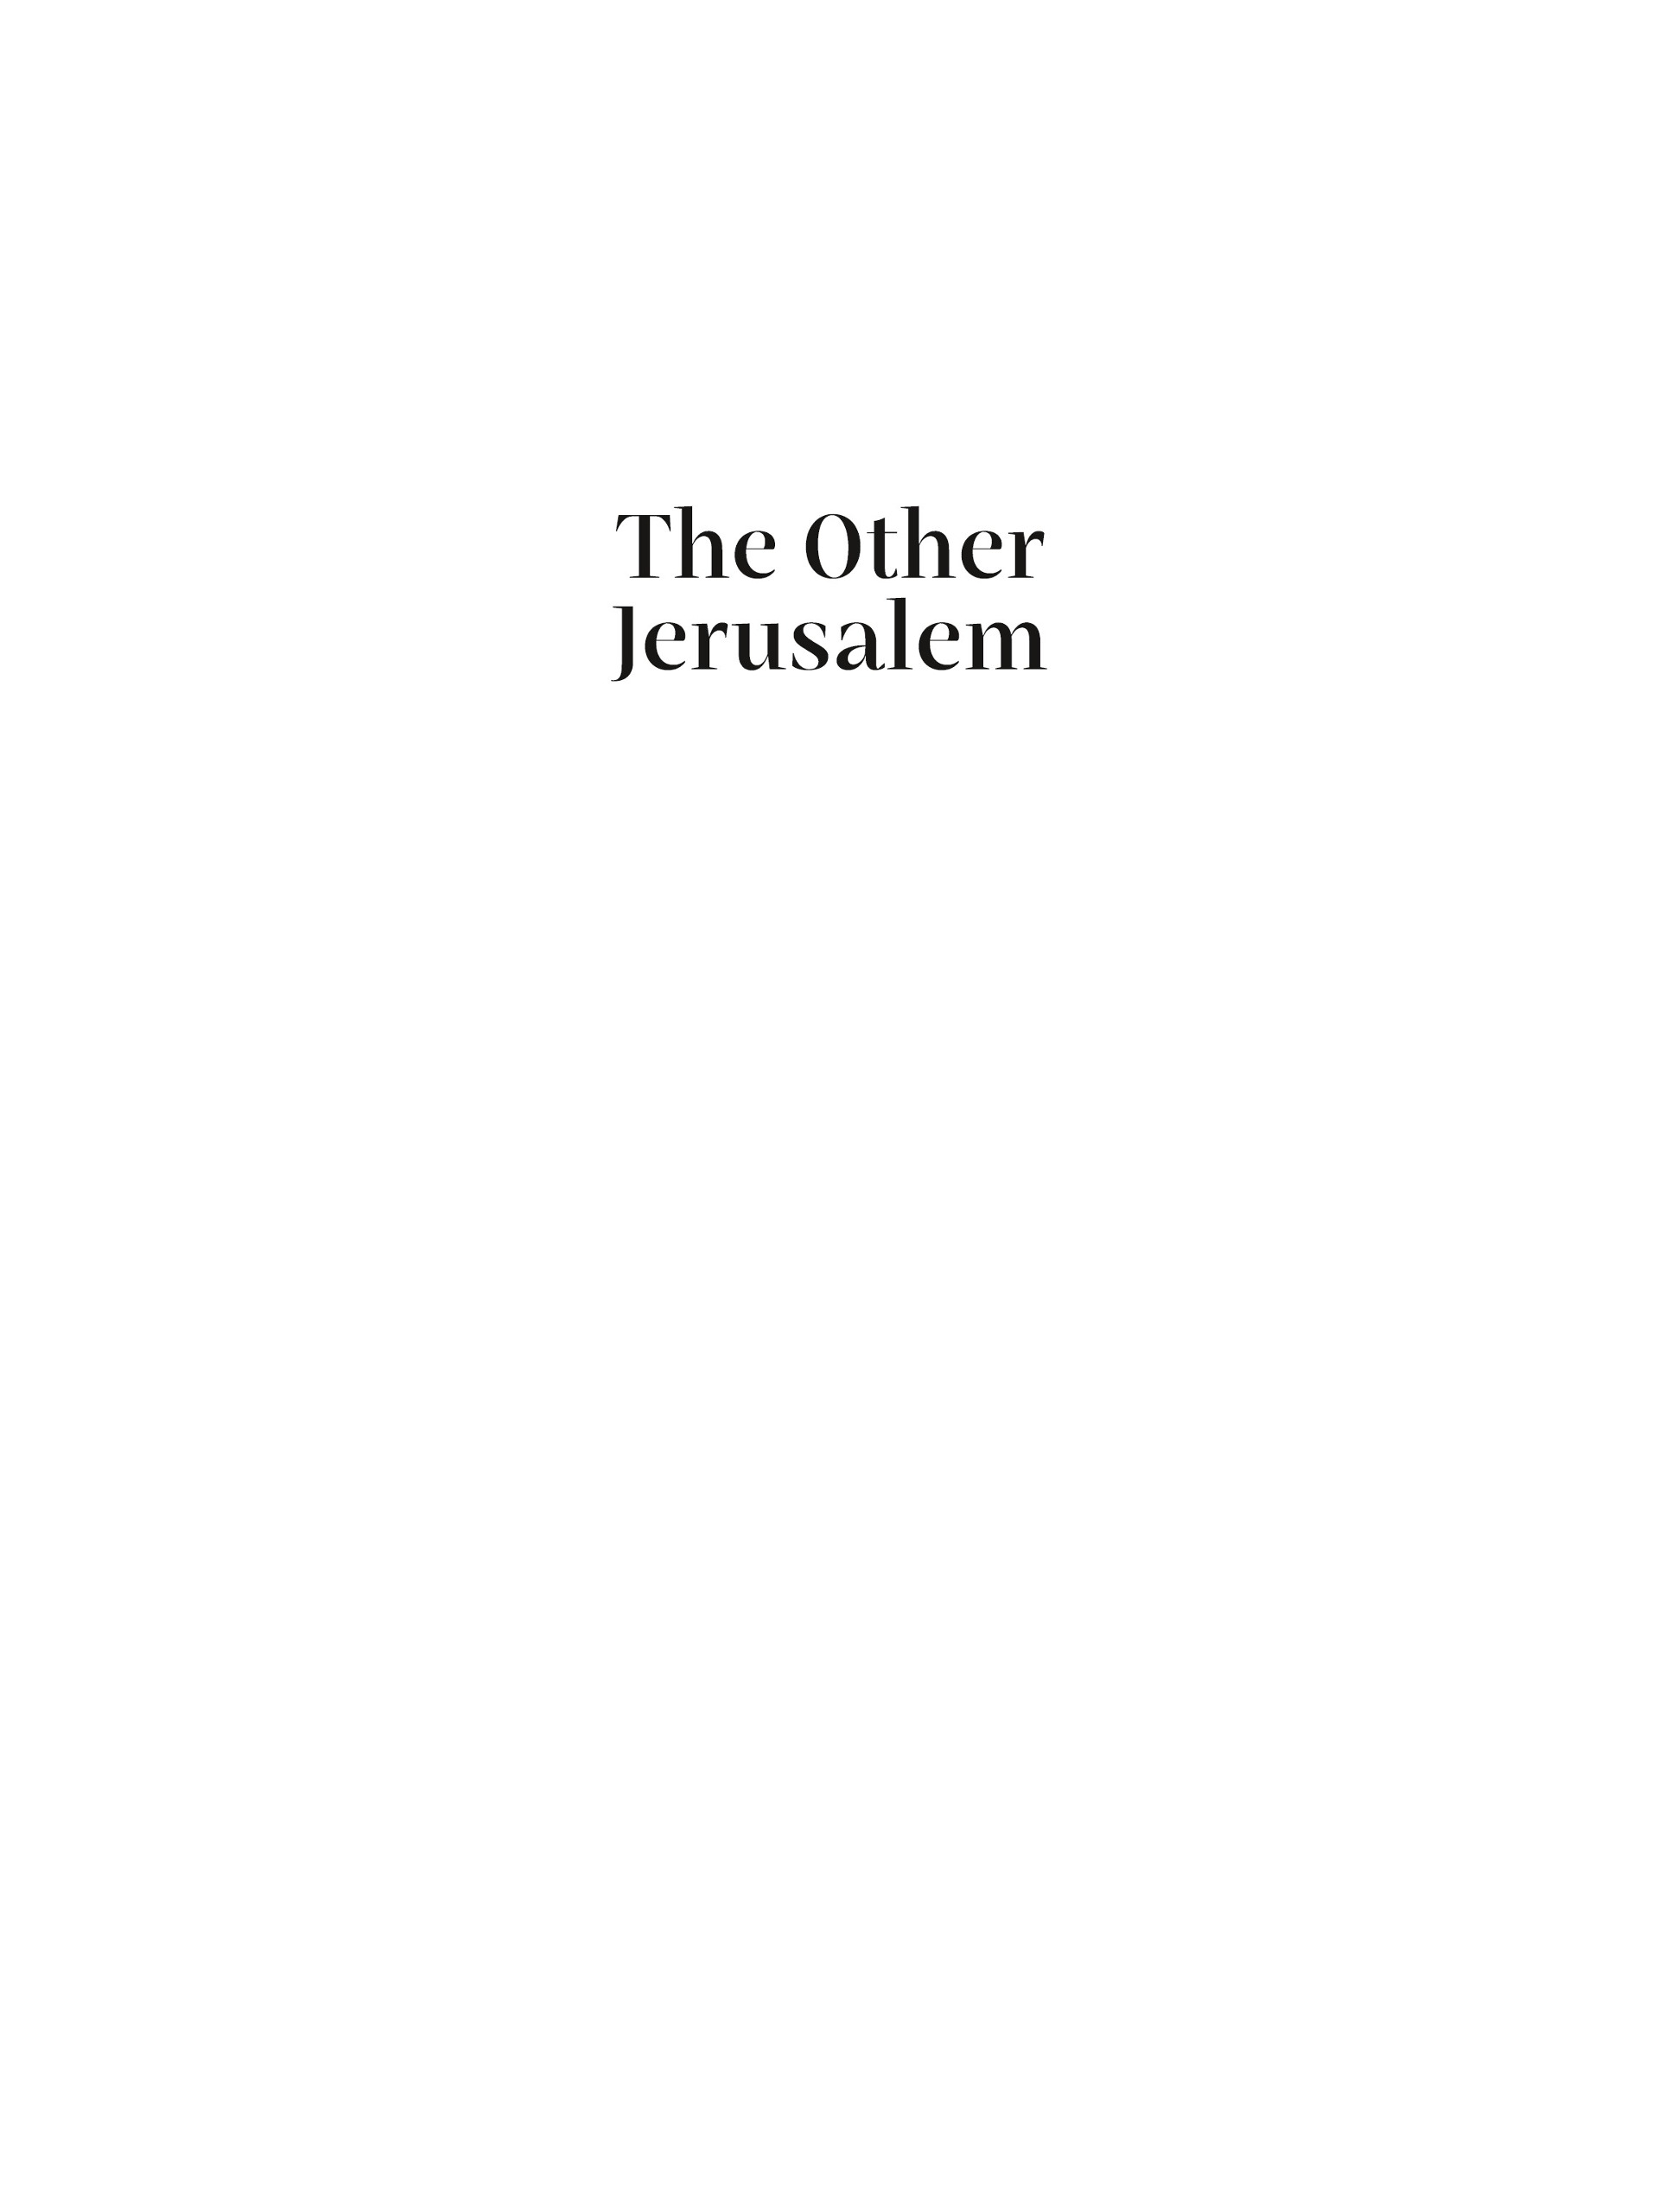 Read online The Other Jerusalem comic -  Issue # TPB - 2